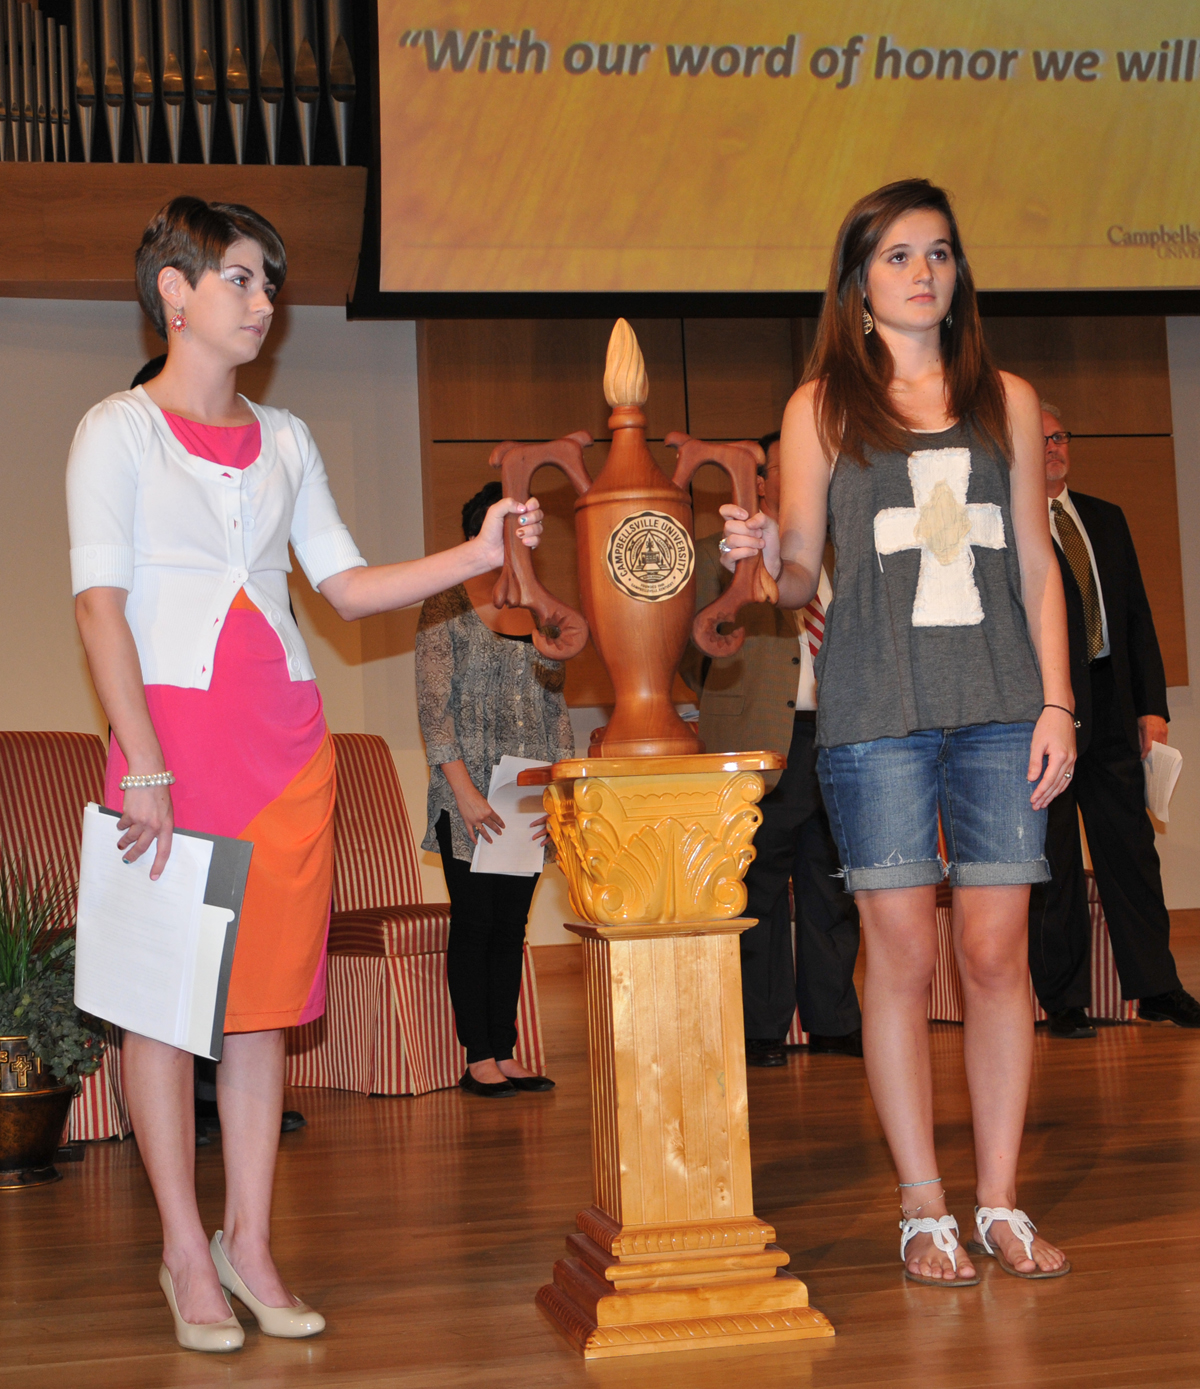 The Lamp of Learning was passed from Jacqueline Nelson to Abby Harnack, freshman president’s scholar from Bowling Green, Ky. (Campbellsville University photo by Linda Waggener)